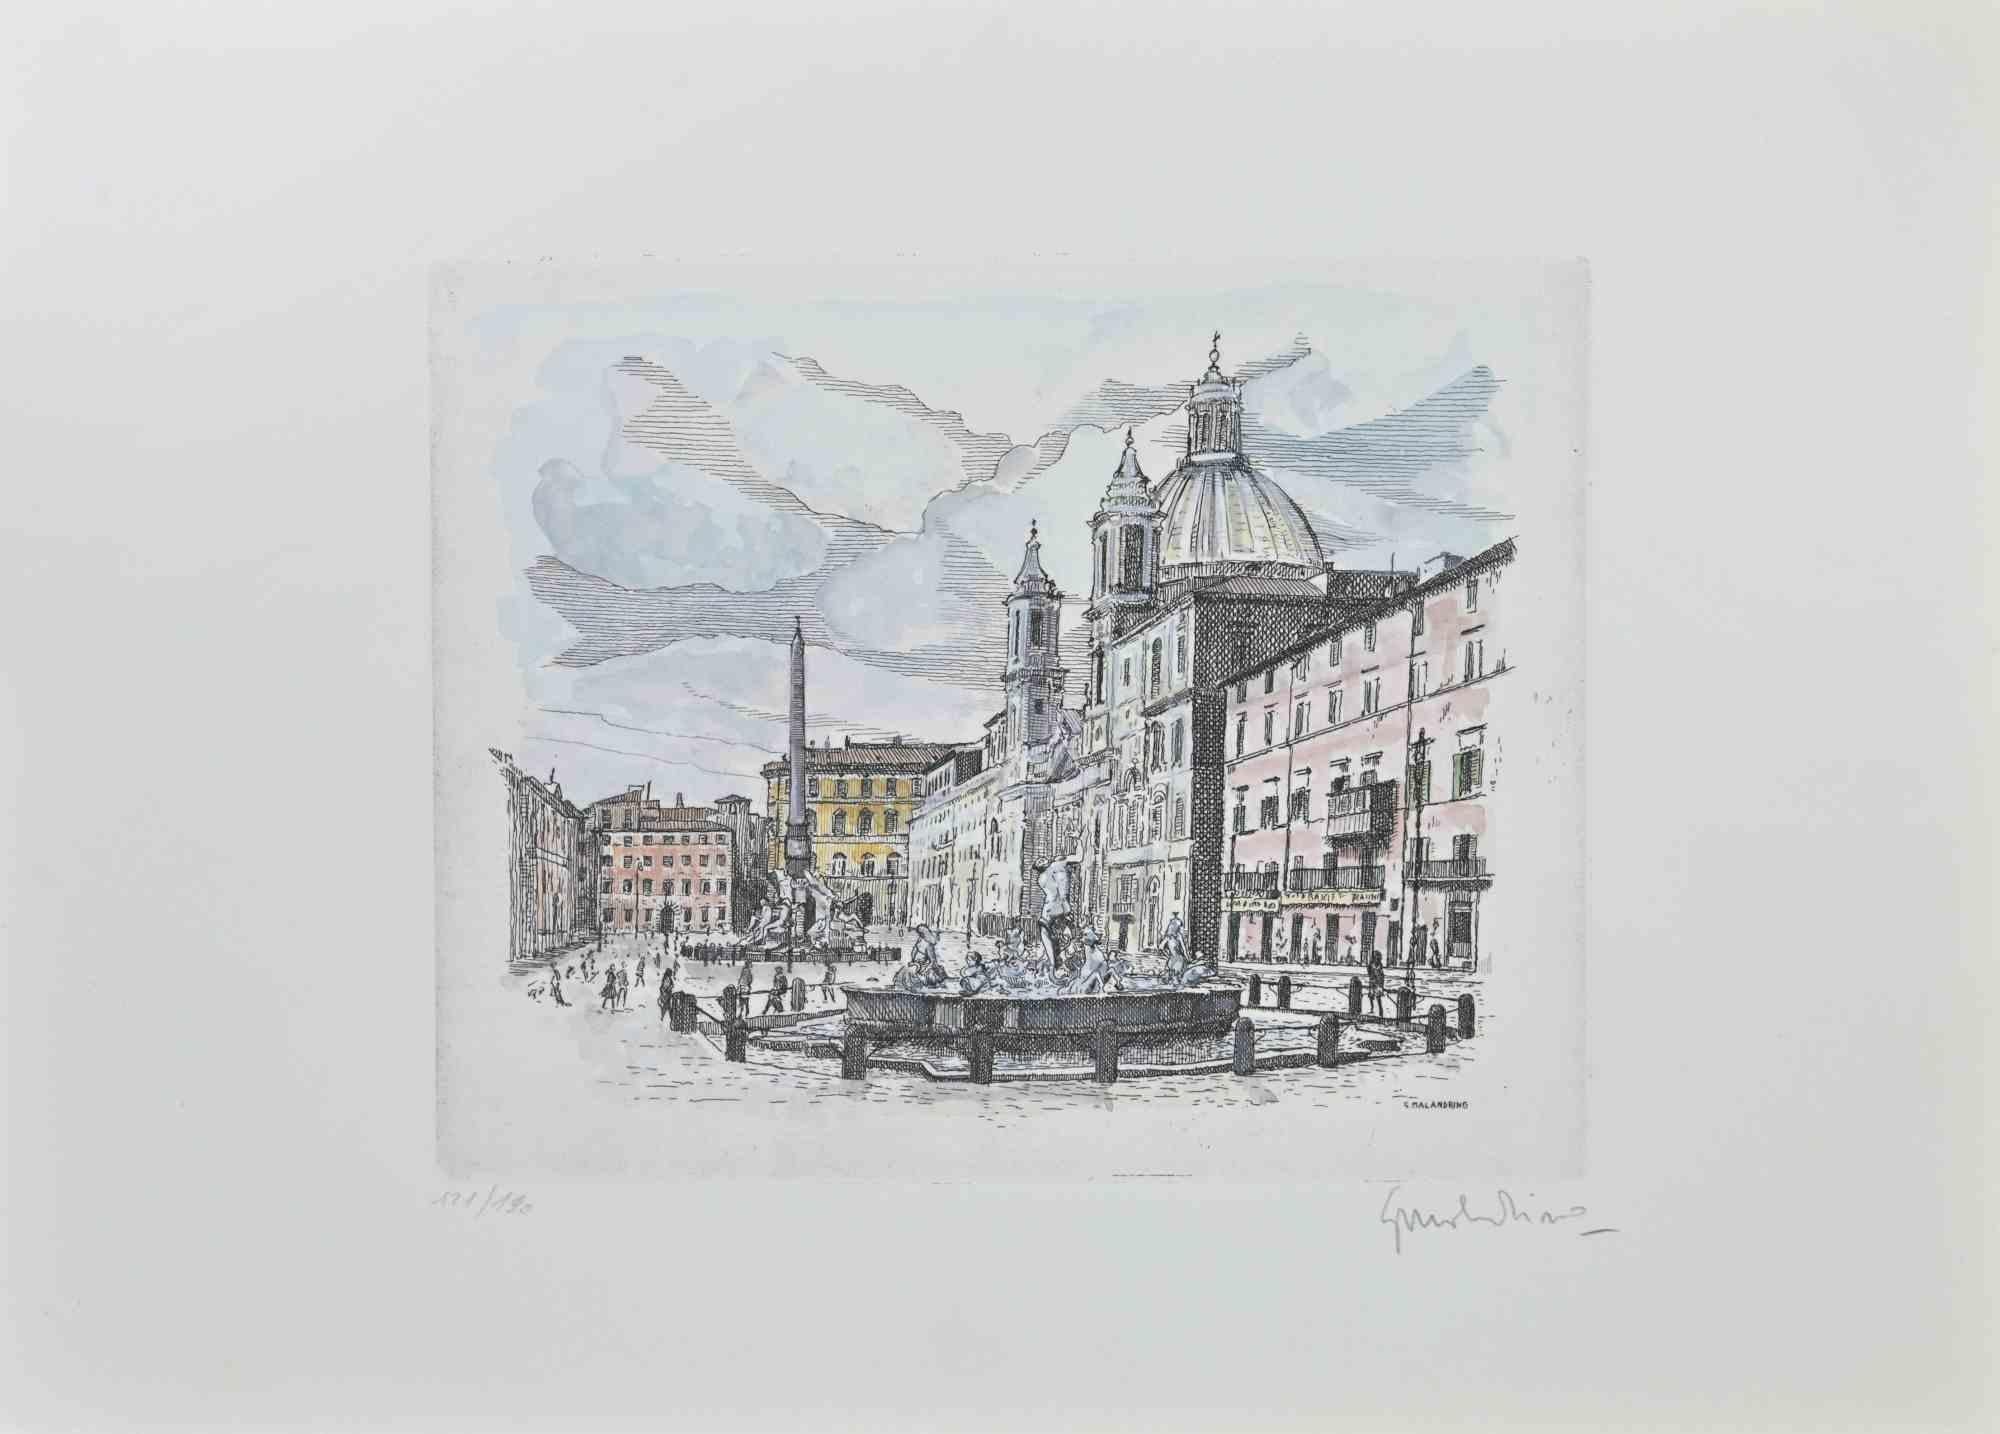 Navona Square is an artwork realized by Giuseppe Malandrino.

Print in etching technique.

Hand-signed by the artist in pencil on the lower right corner.

Numbered edition of 190 copies.

Good condition. 

This artwork represents the beautiful roman